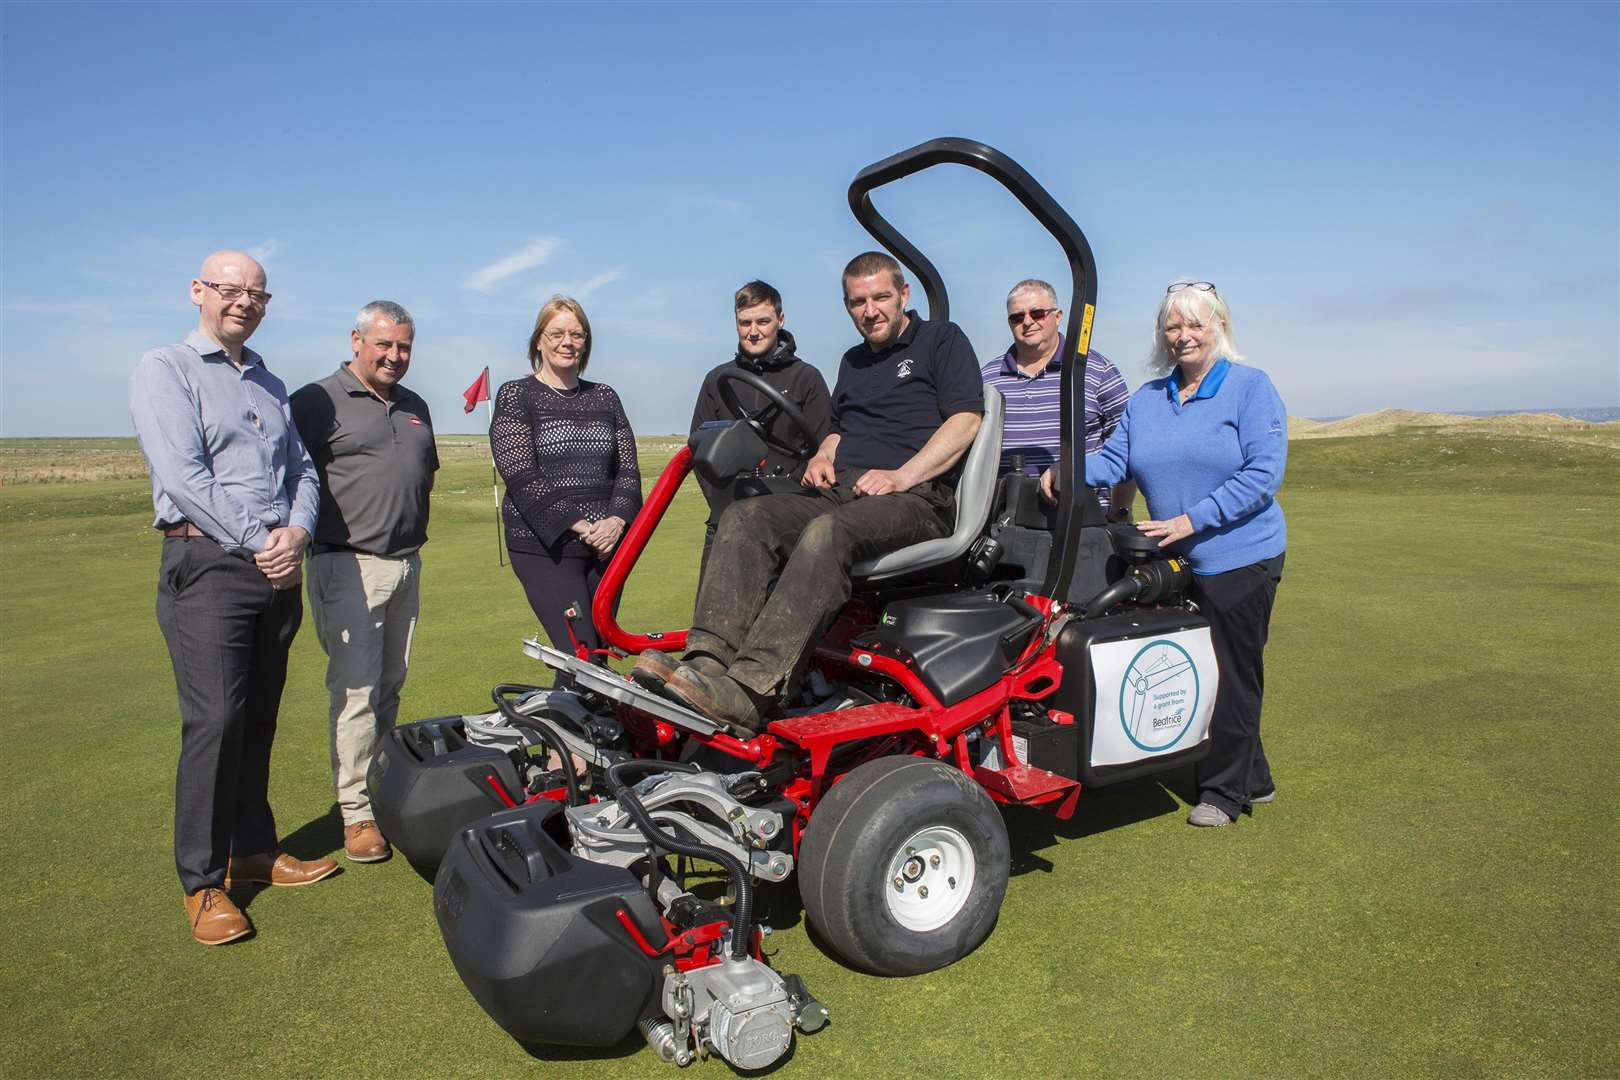 Greenkeeper Dougie Thorburn in the driving seat while (from left) are David Shearer, fund co-ordinator of the Caithness and North Sutherland Fund, Dave Raitt, Reesink Turfcare, Beatrice fund representative Linda Bremner, final-year greenkeeping apprentice Owen Cormack, club vice-captain Aly Mackay and captain Cat Macleod. Picture: Robert MacDonald / Northern Studios